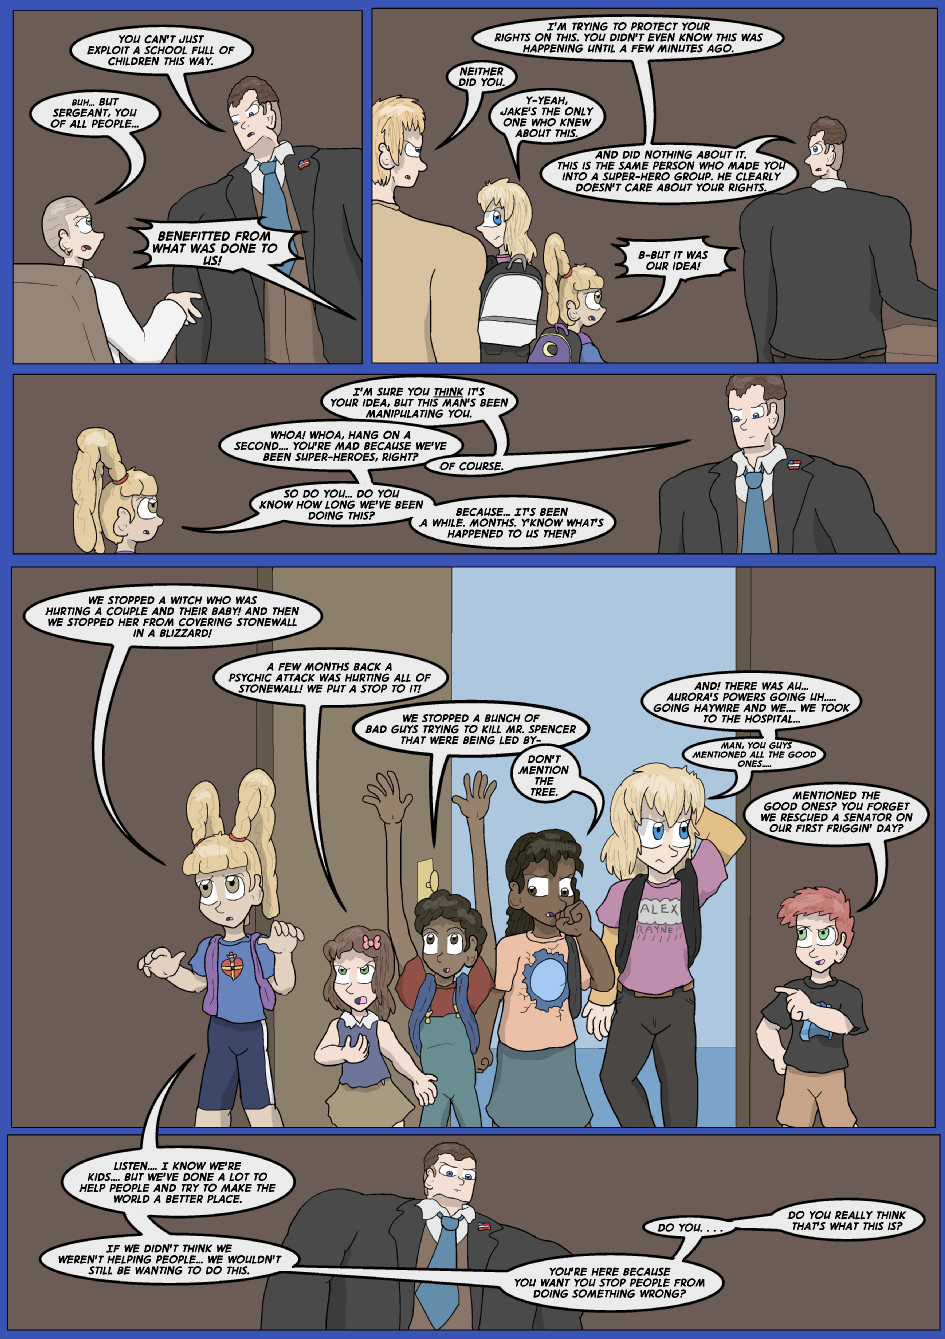 Showing Your Blue Colors- Page 9